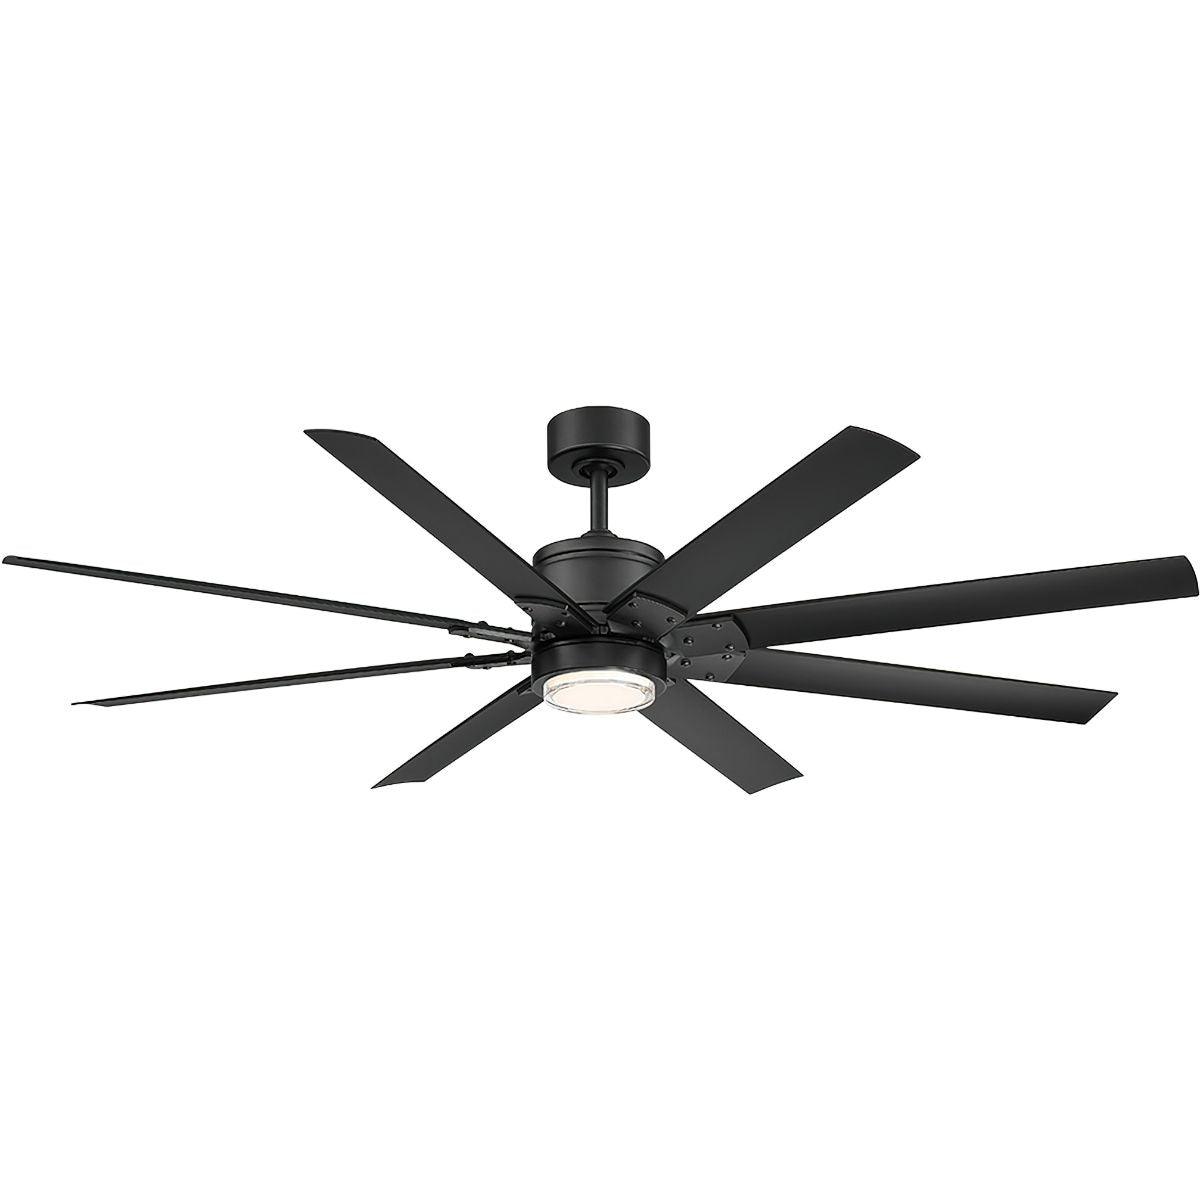 Renegade 52 Inch Windmill Outdoor Smart Ceiling Fan With Light And Remote, Matte Black Finish